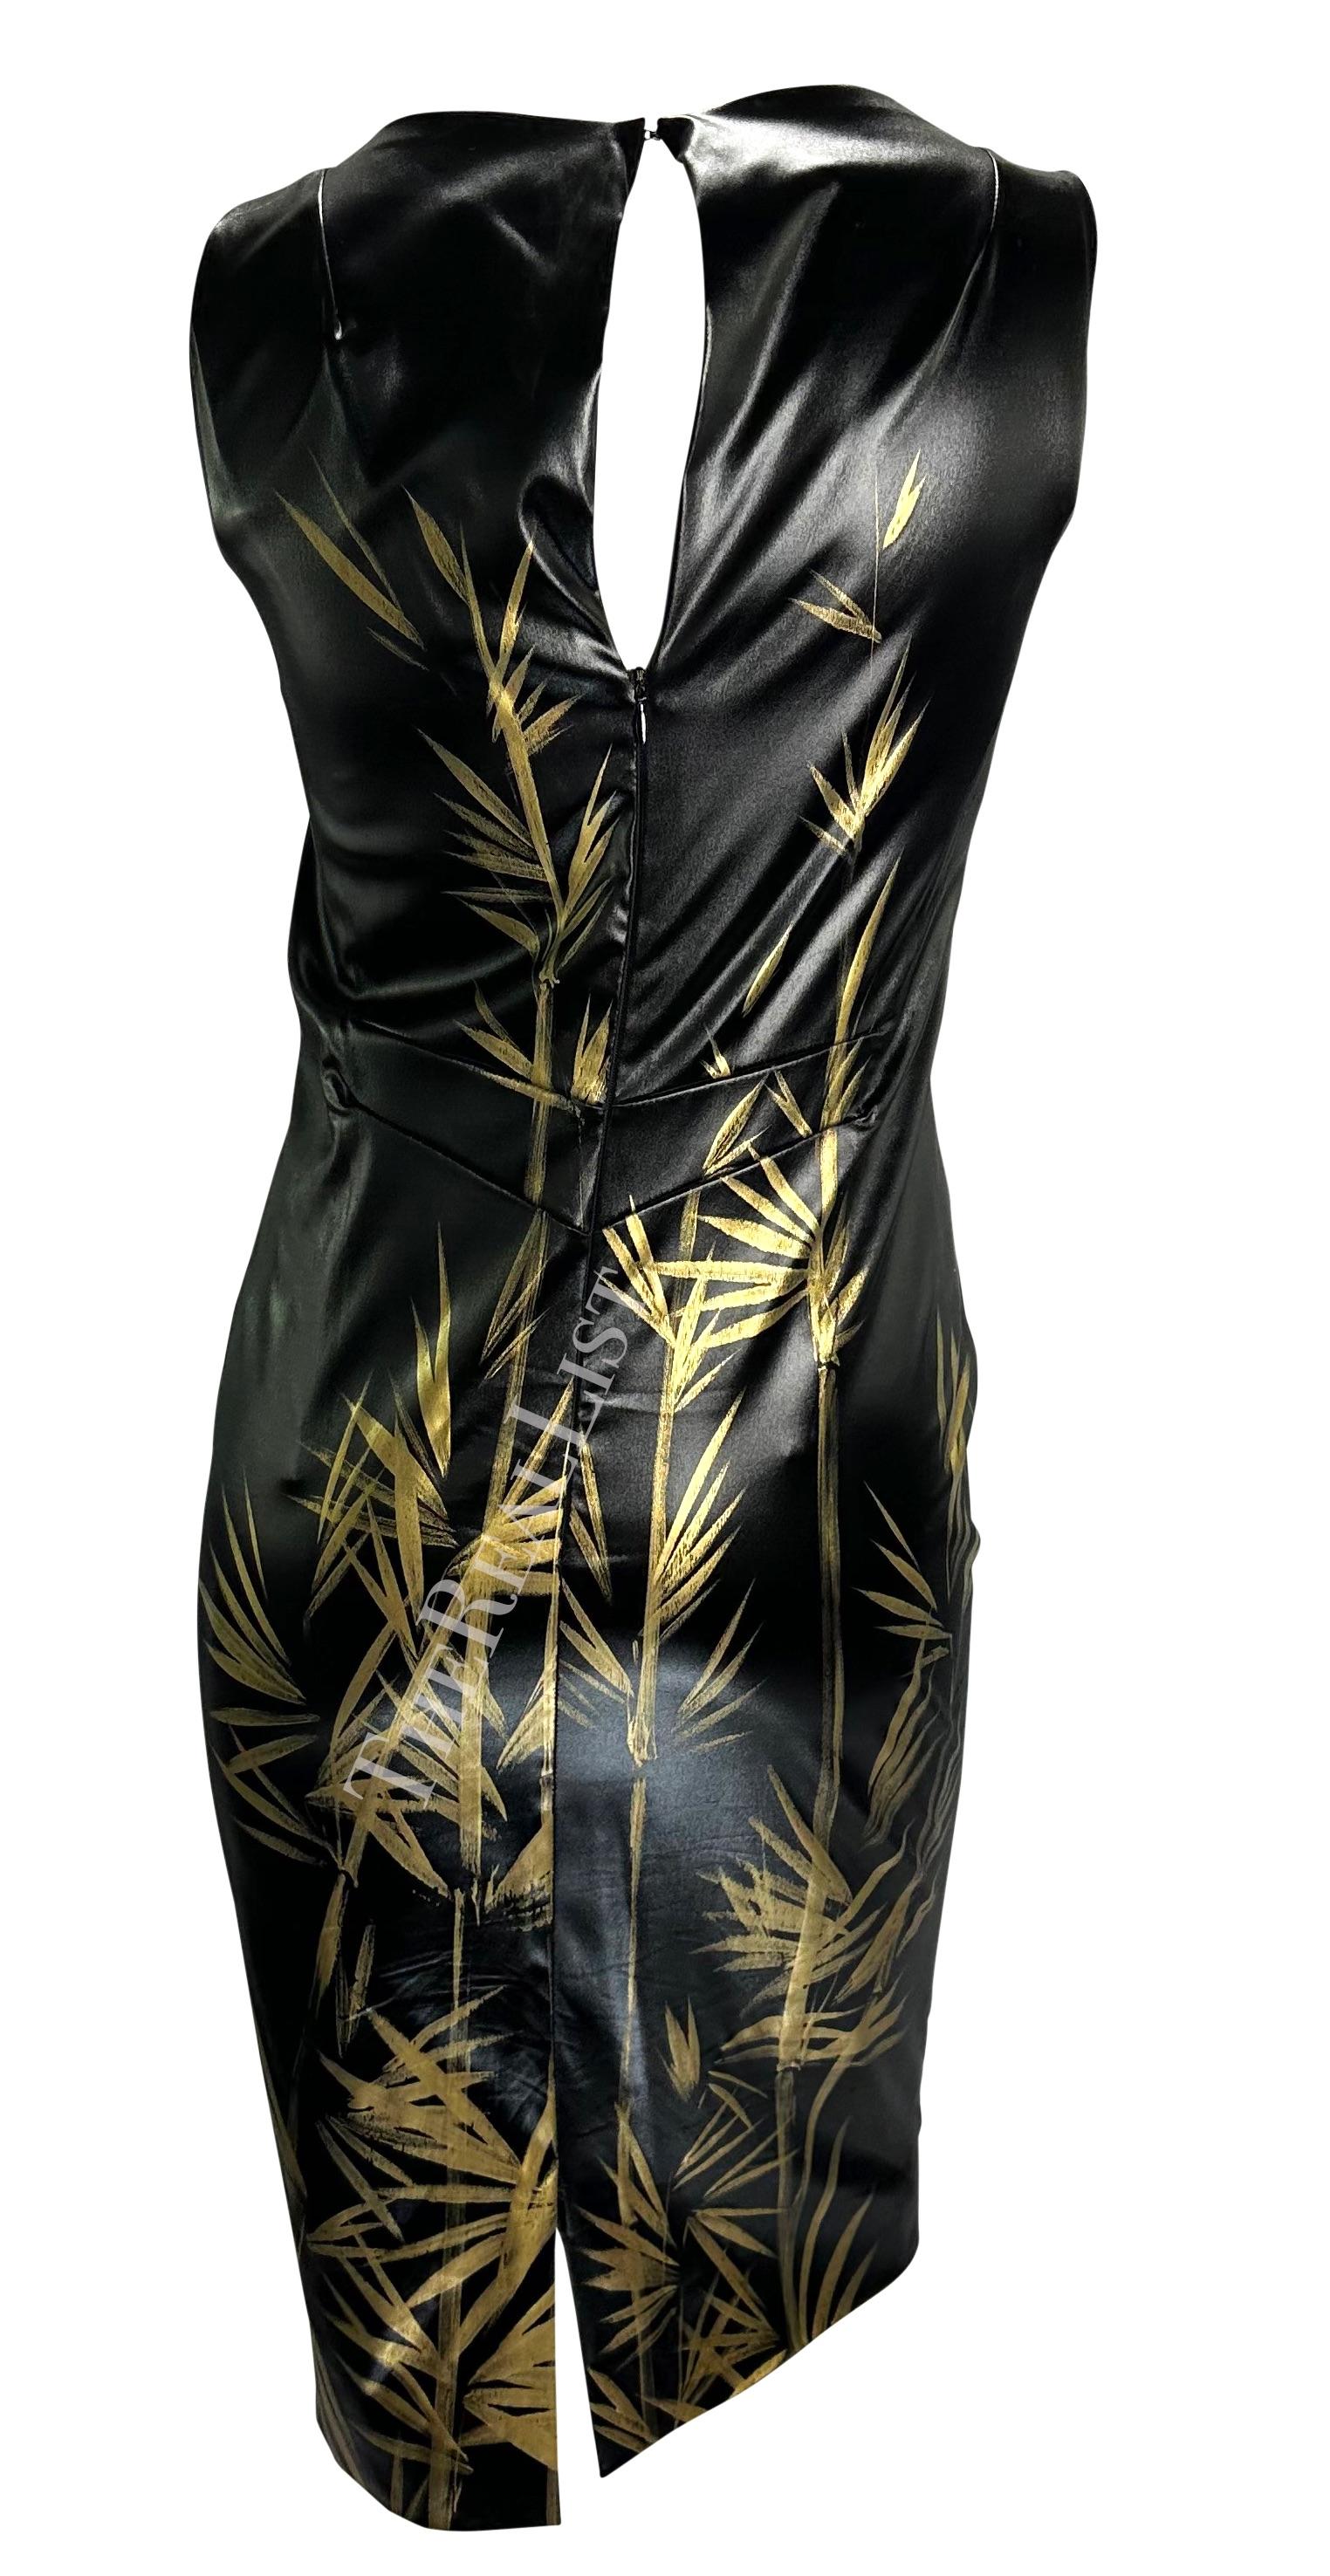 F/W 1999 Dolce & Gabbana Black 'Wet Look' Hand-Painted Gold Bamboo Bodycon Dress In Good Condition For Sale In West Hollywood, CA